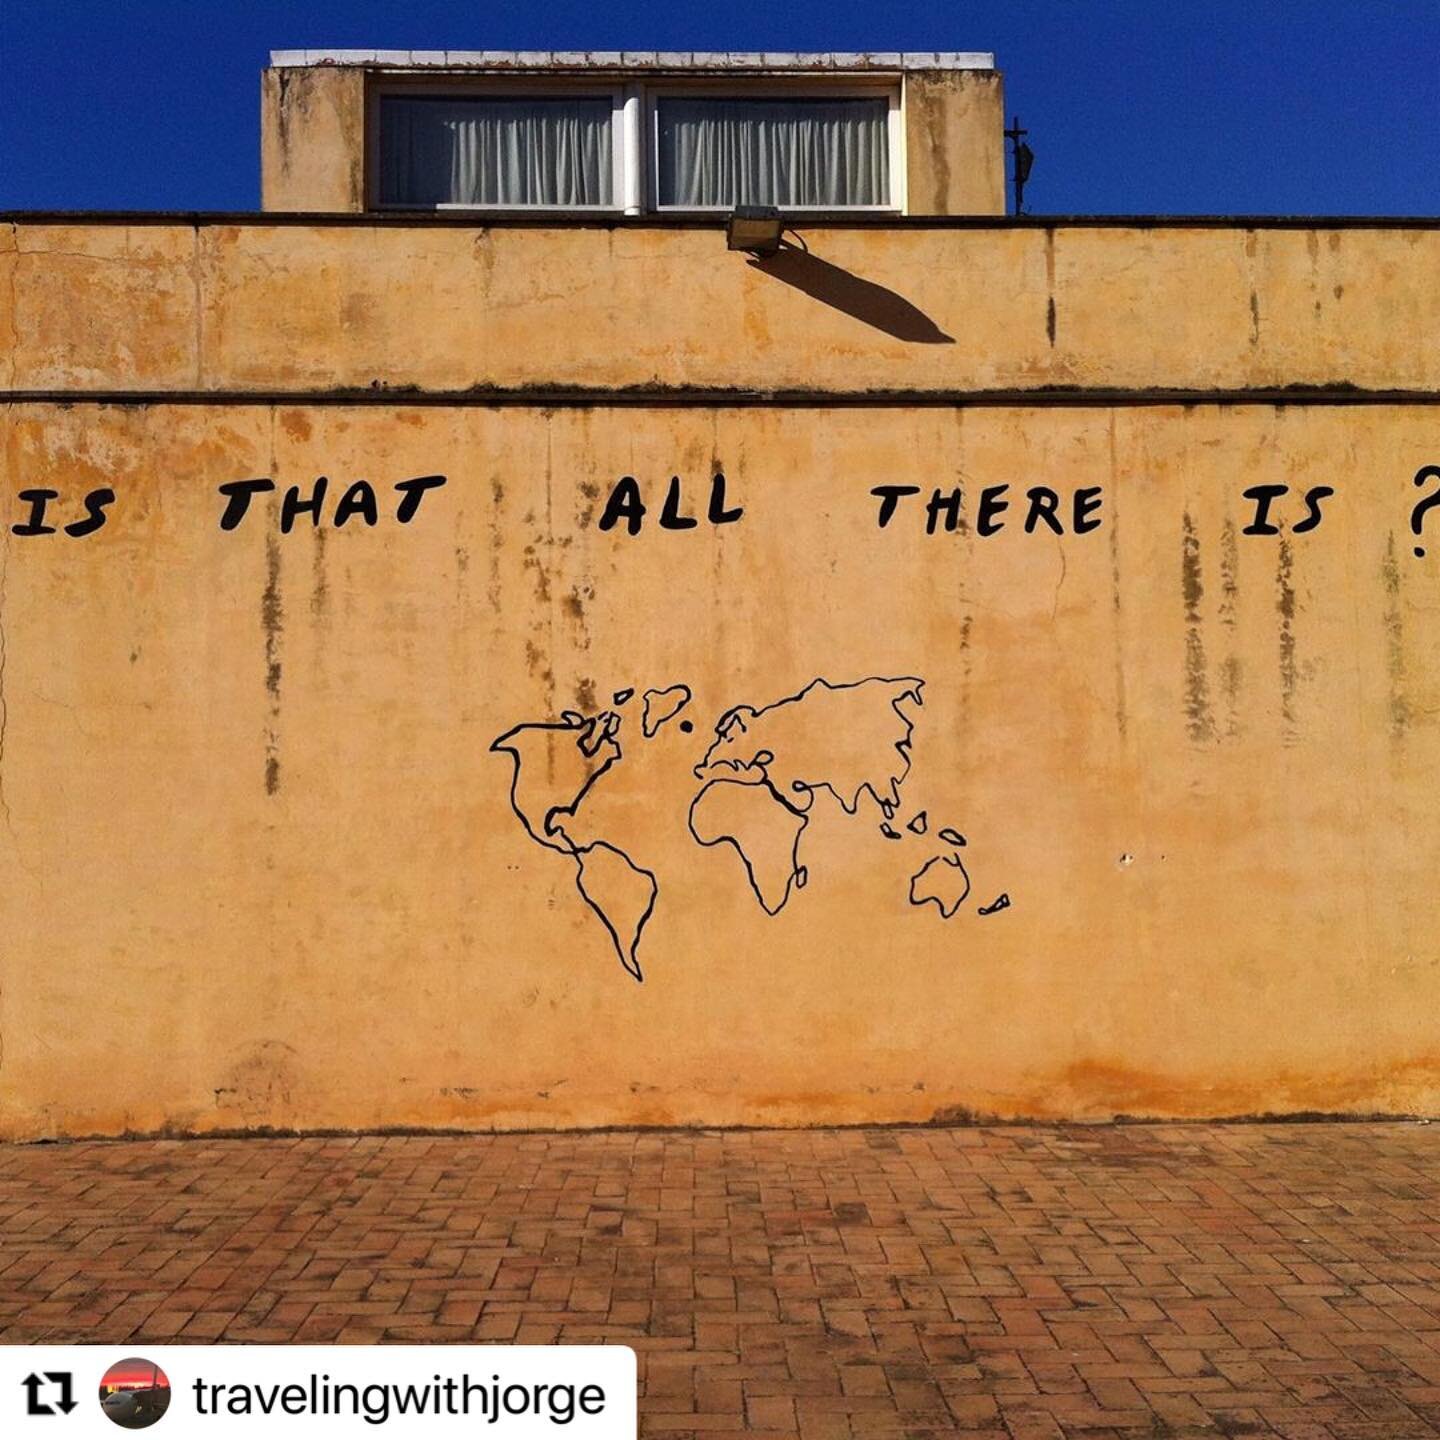 #Repost @travelingwithjorge finds beauty in Street Art in Spain!
・・・
Found in one of my trips. I just love it. Share you favorite street art snap in stories and tag @guide.collective !!
#streetart #spain #creative #art